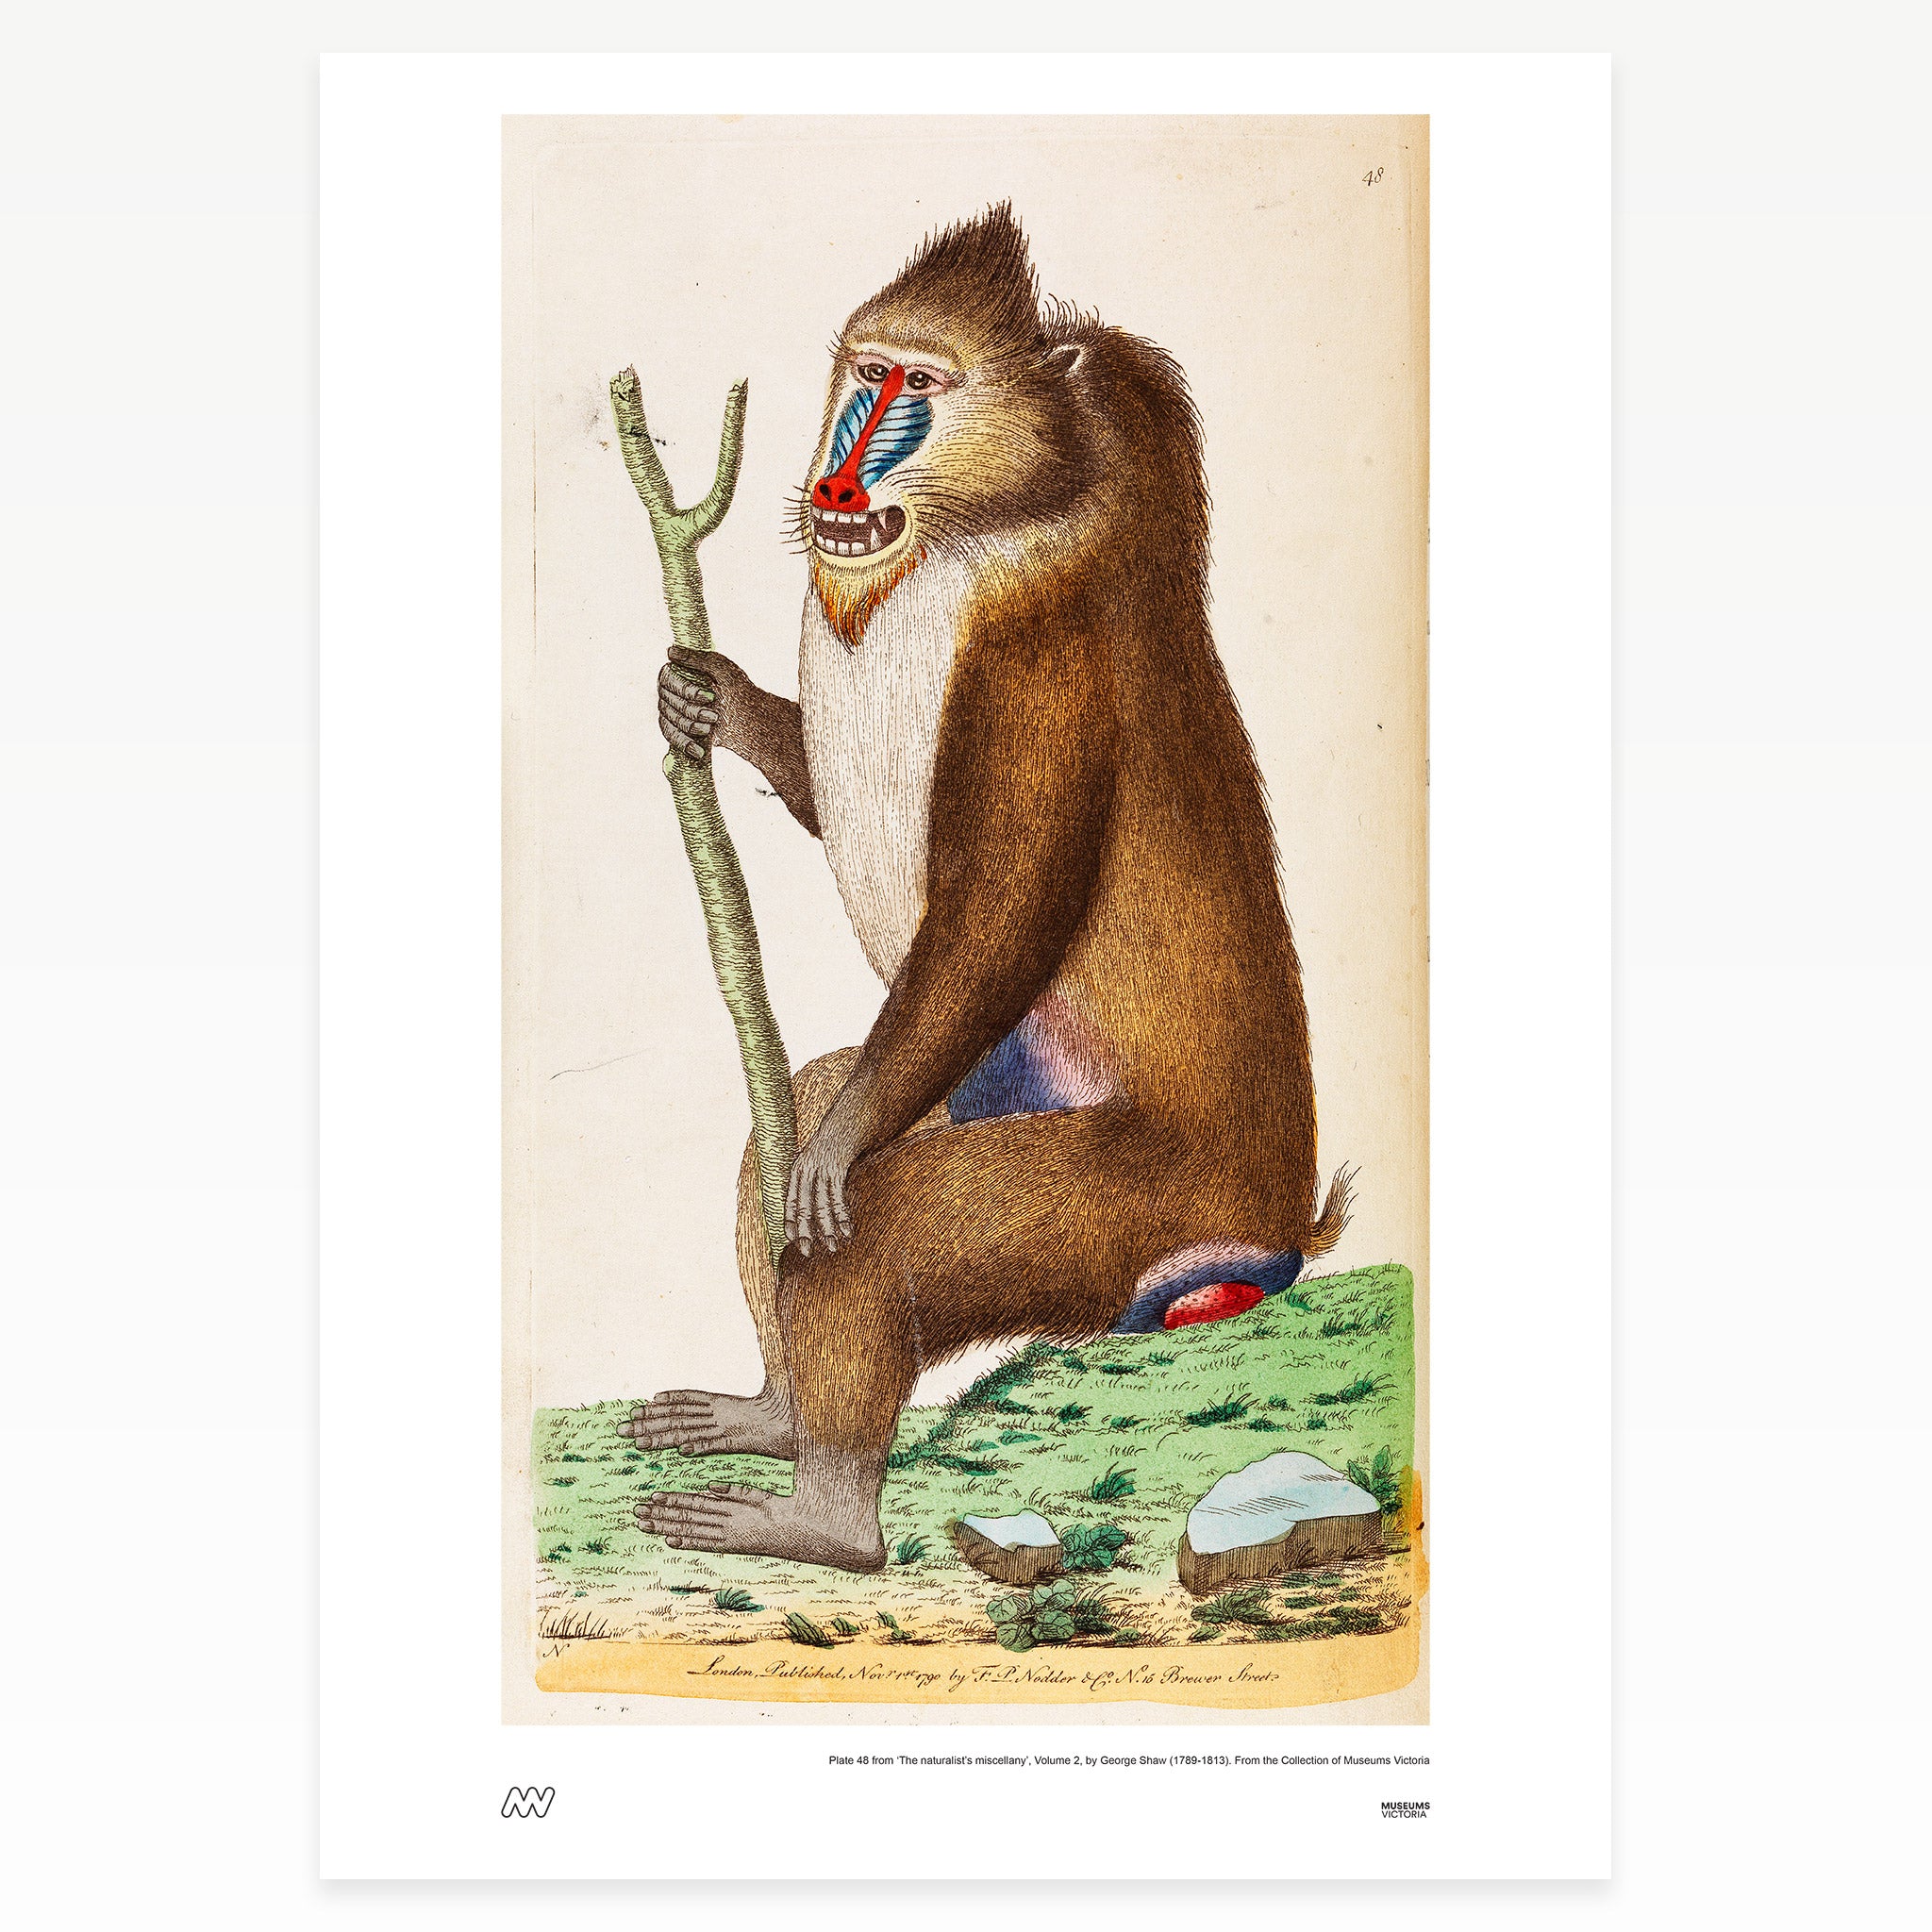 Seated baboon holding a stick